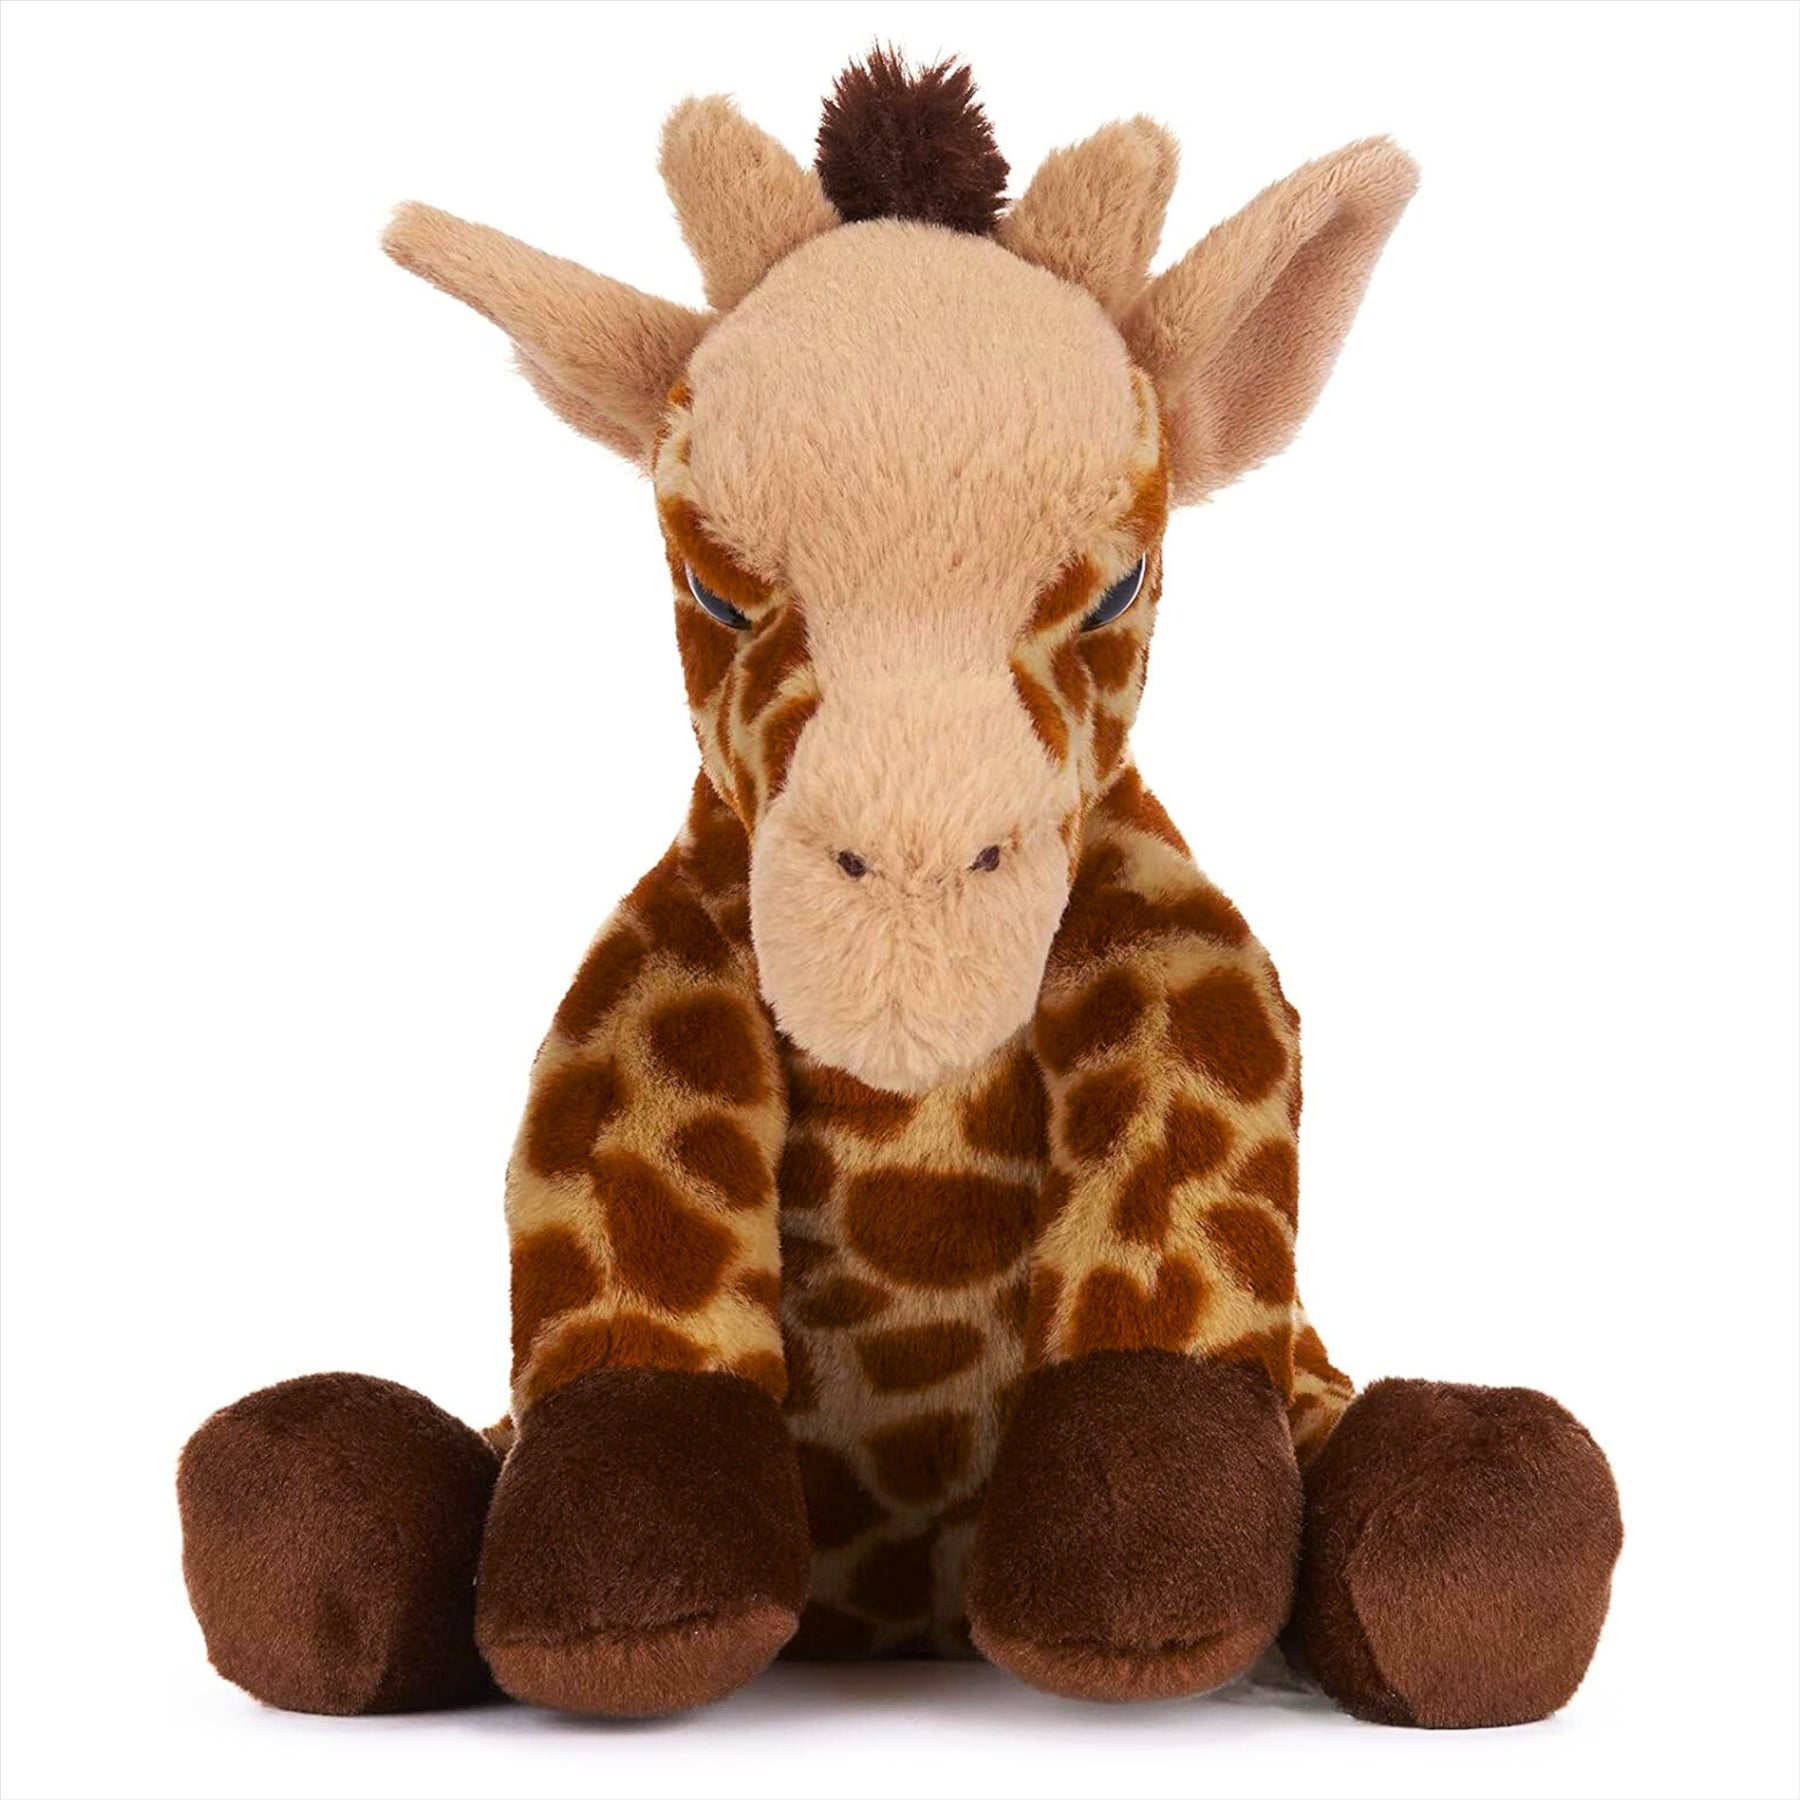 Posh Paws Out of Africa Animals Collection Giraffe Super Soft Plush Toy 30cm 12"